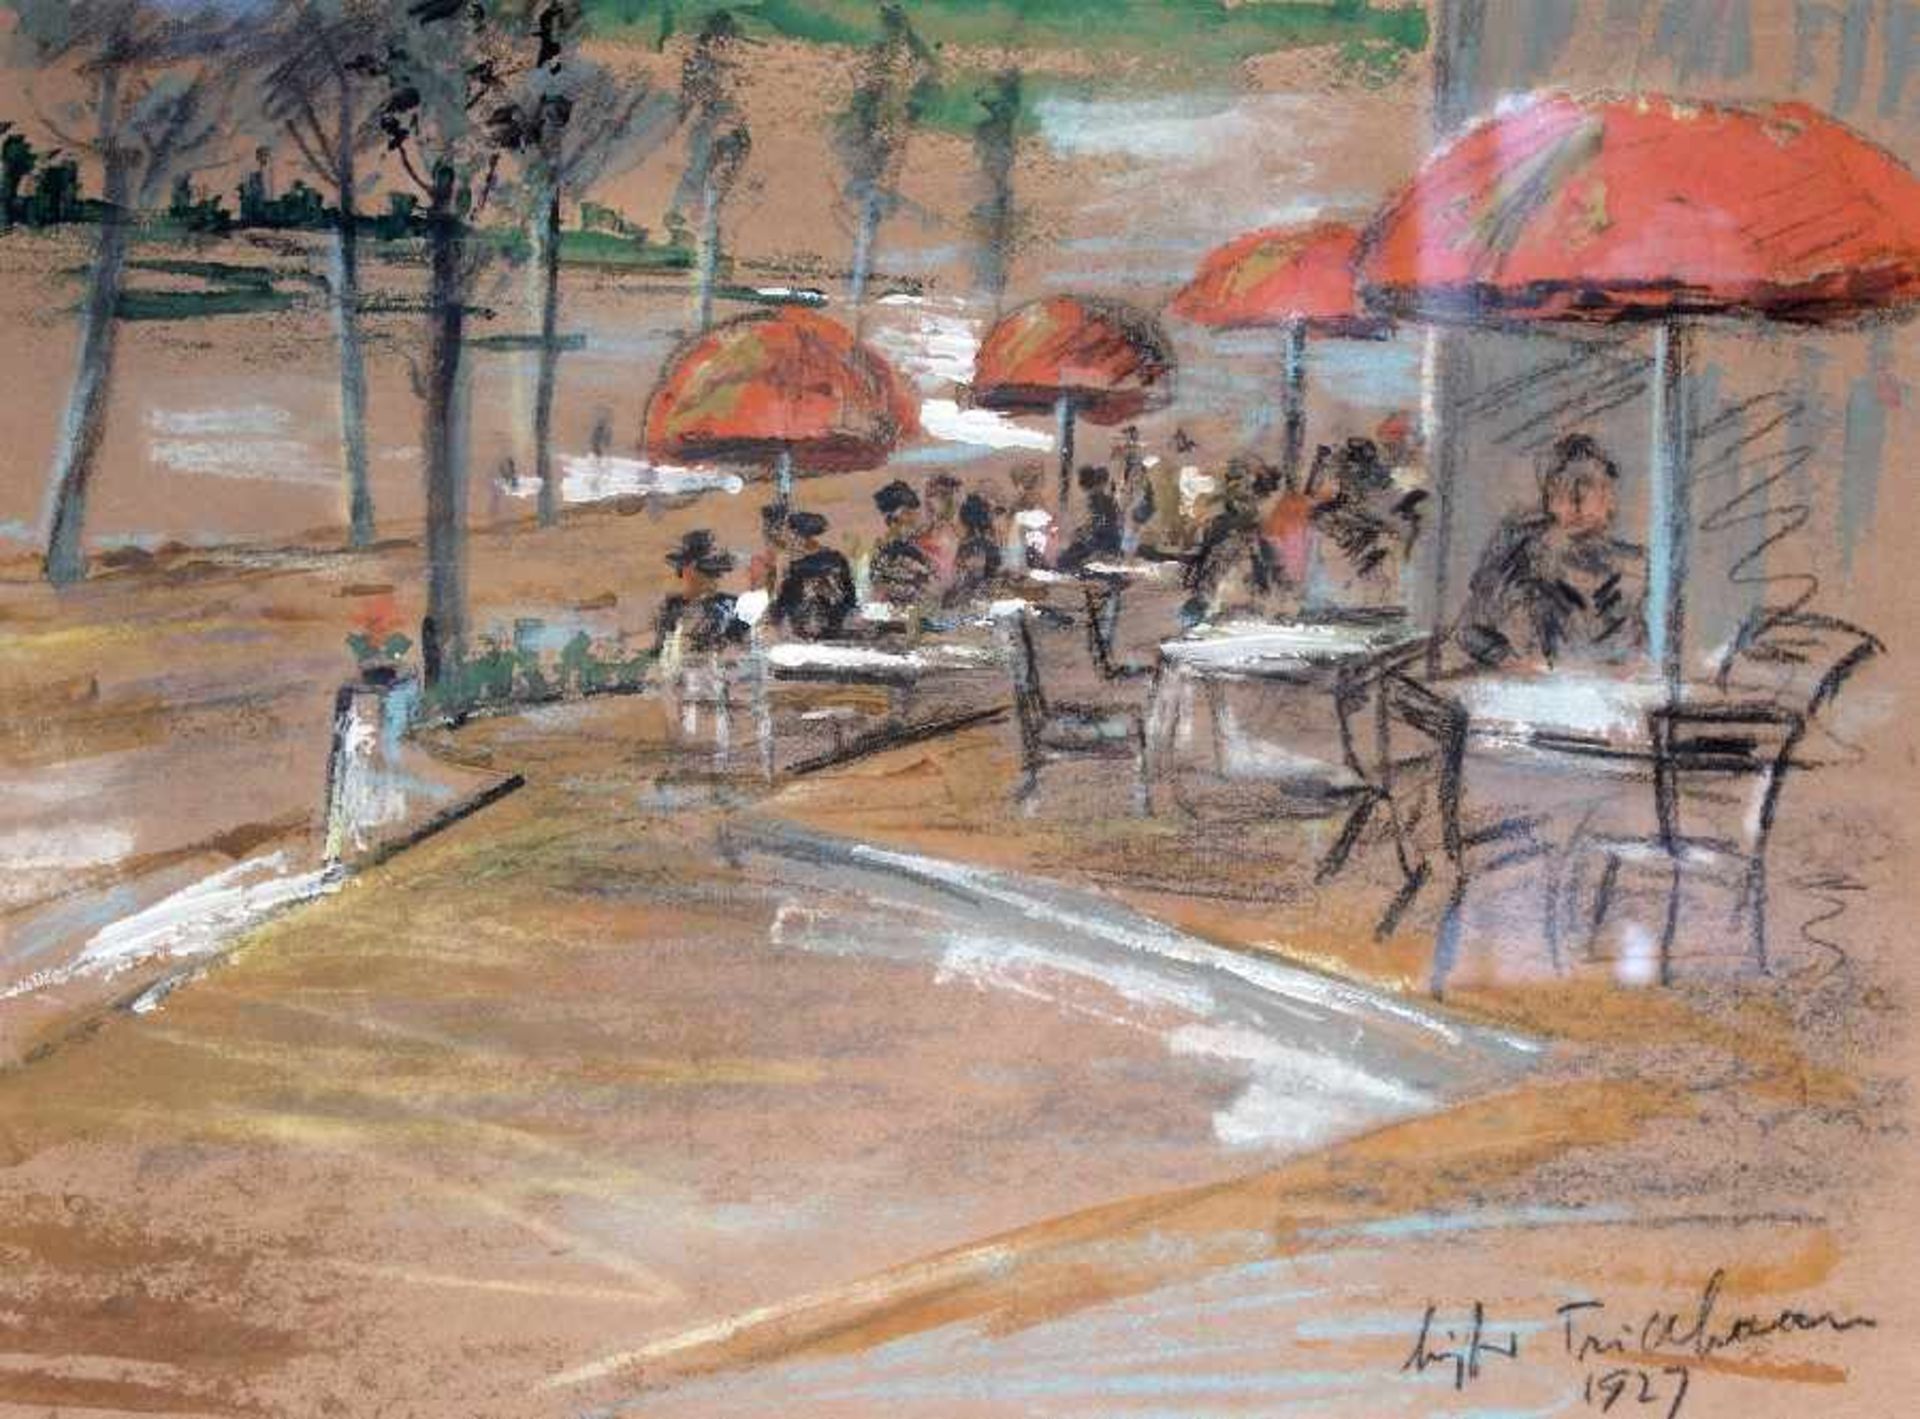 Siegfried Trillhaase1892 - 1960Café on the RhineColored chalks and gouache on paper; H 277 mm, W 378